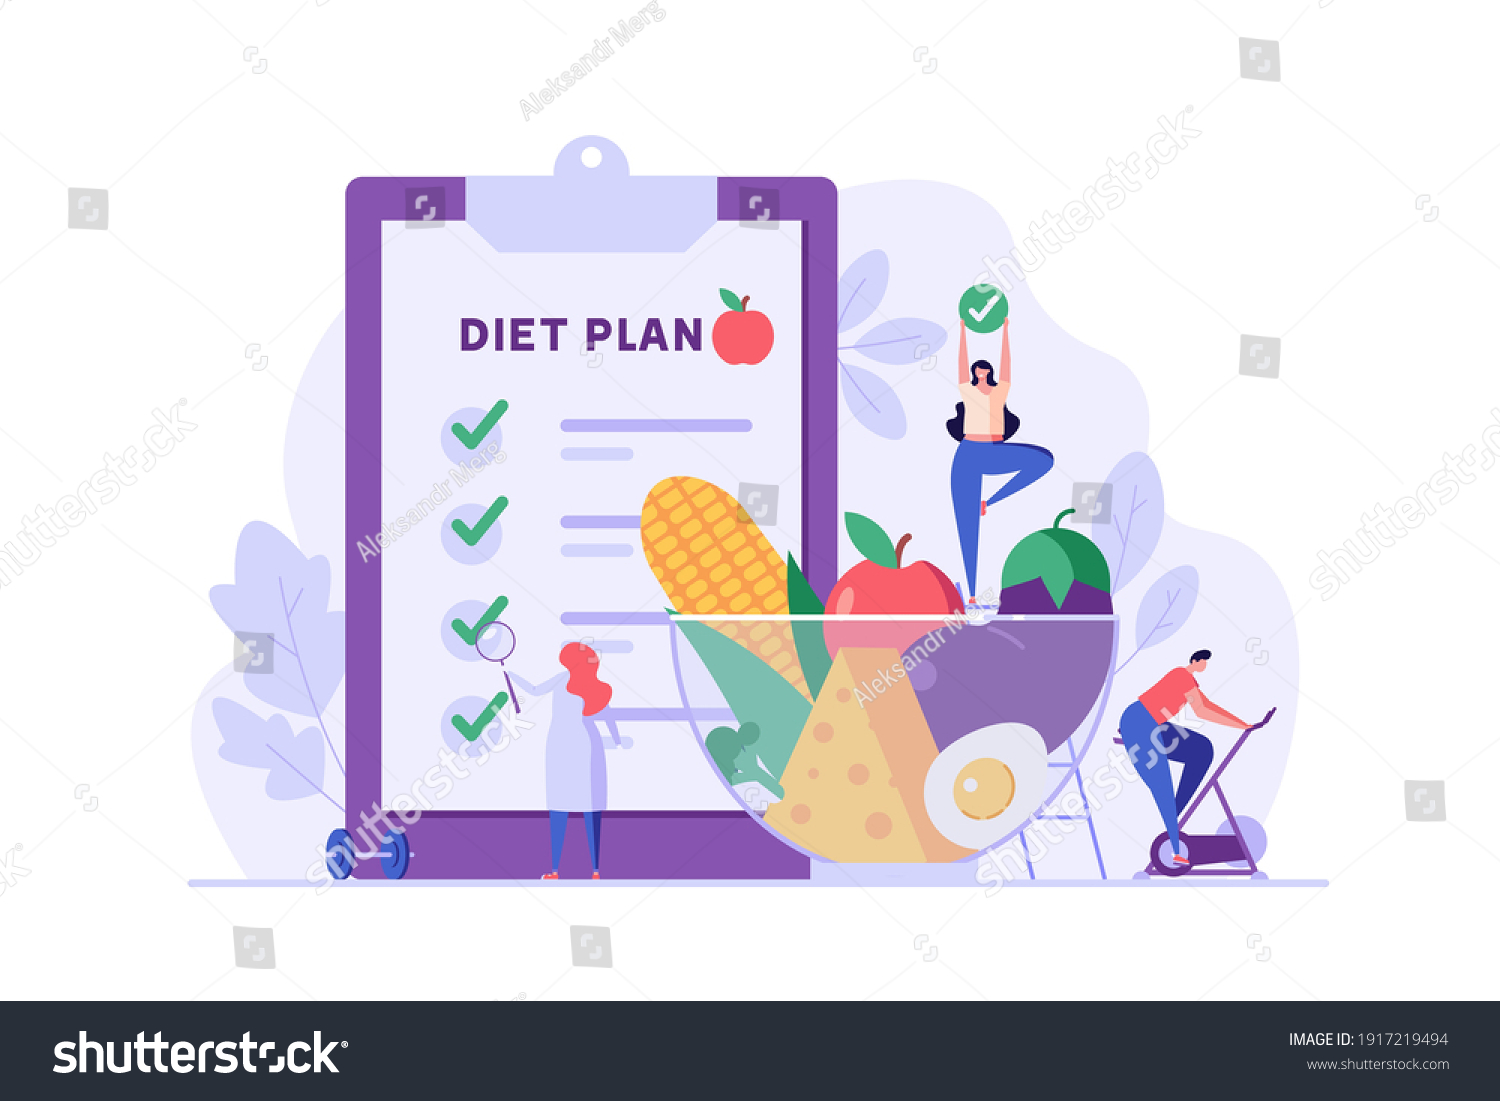 Diet plan illustration. People exercising and doing fitness. Doctor planning diet with vegetable. Concept of dietary eating, meal planning, nutrition consultation. Vector illustration for web design #1917219494